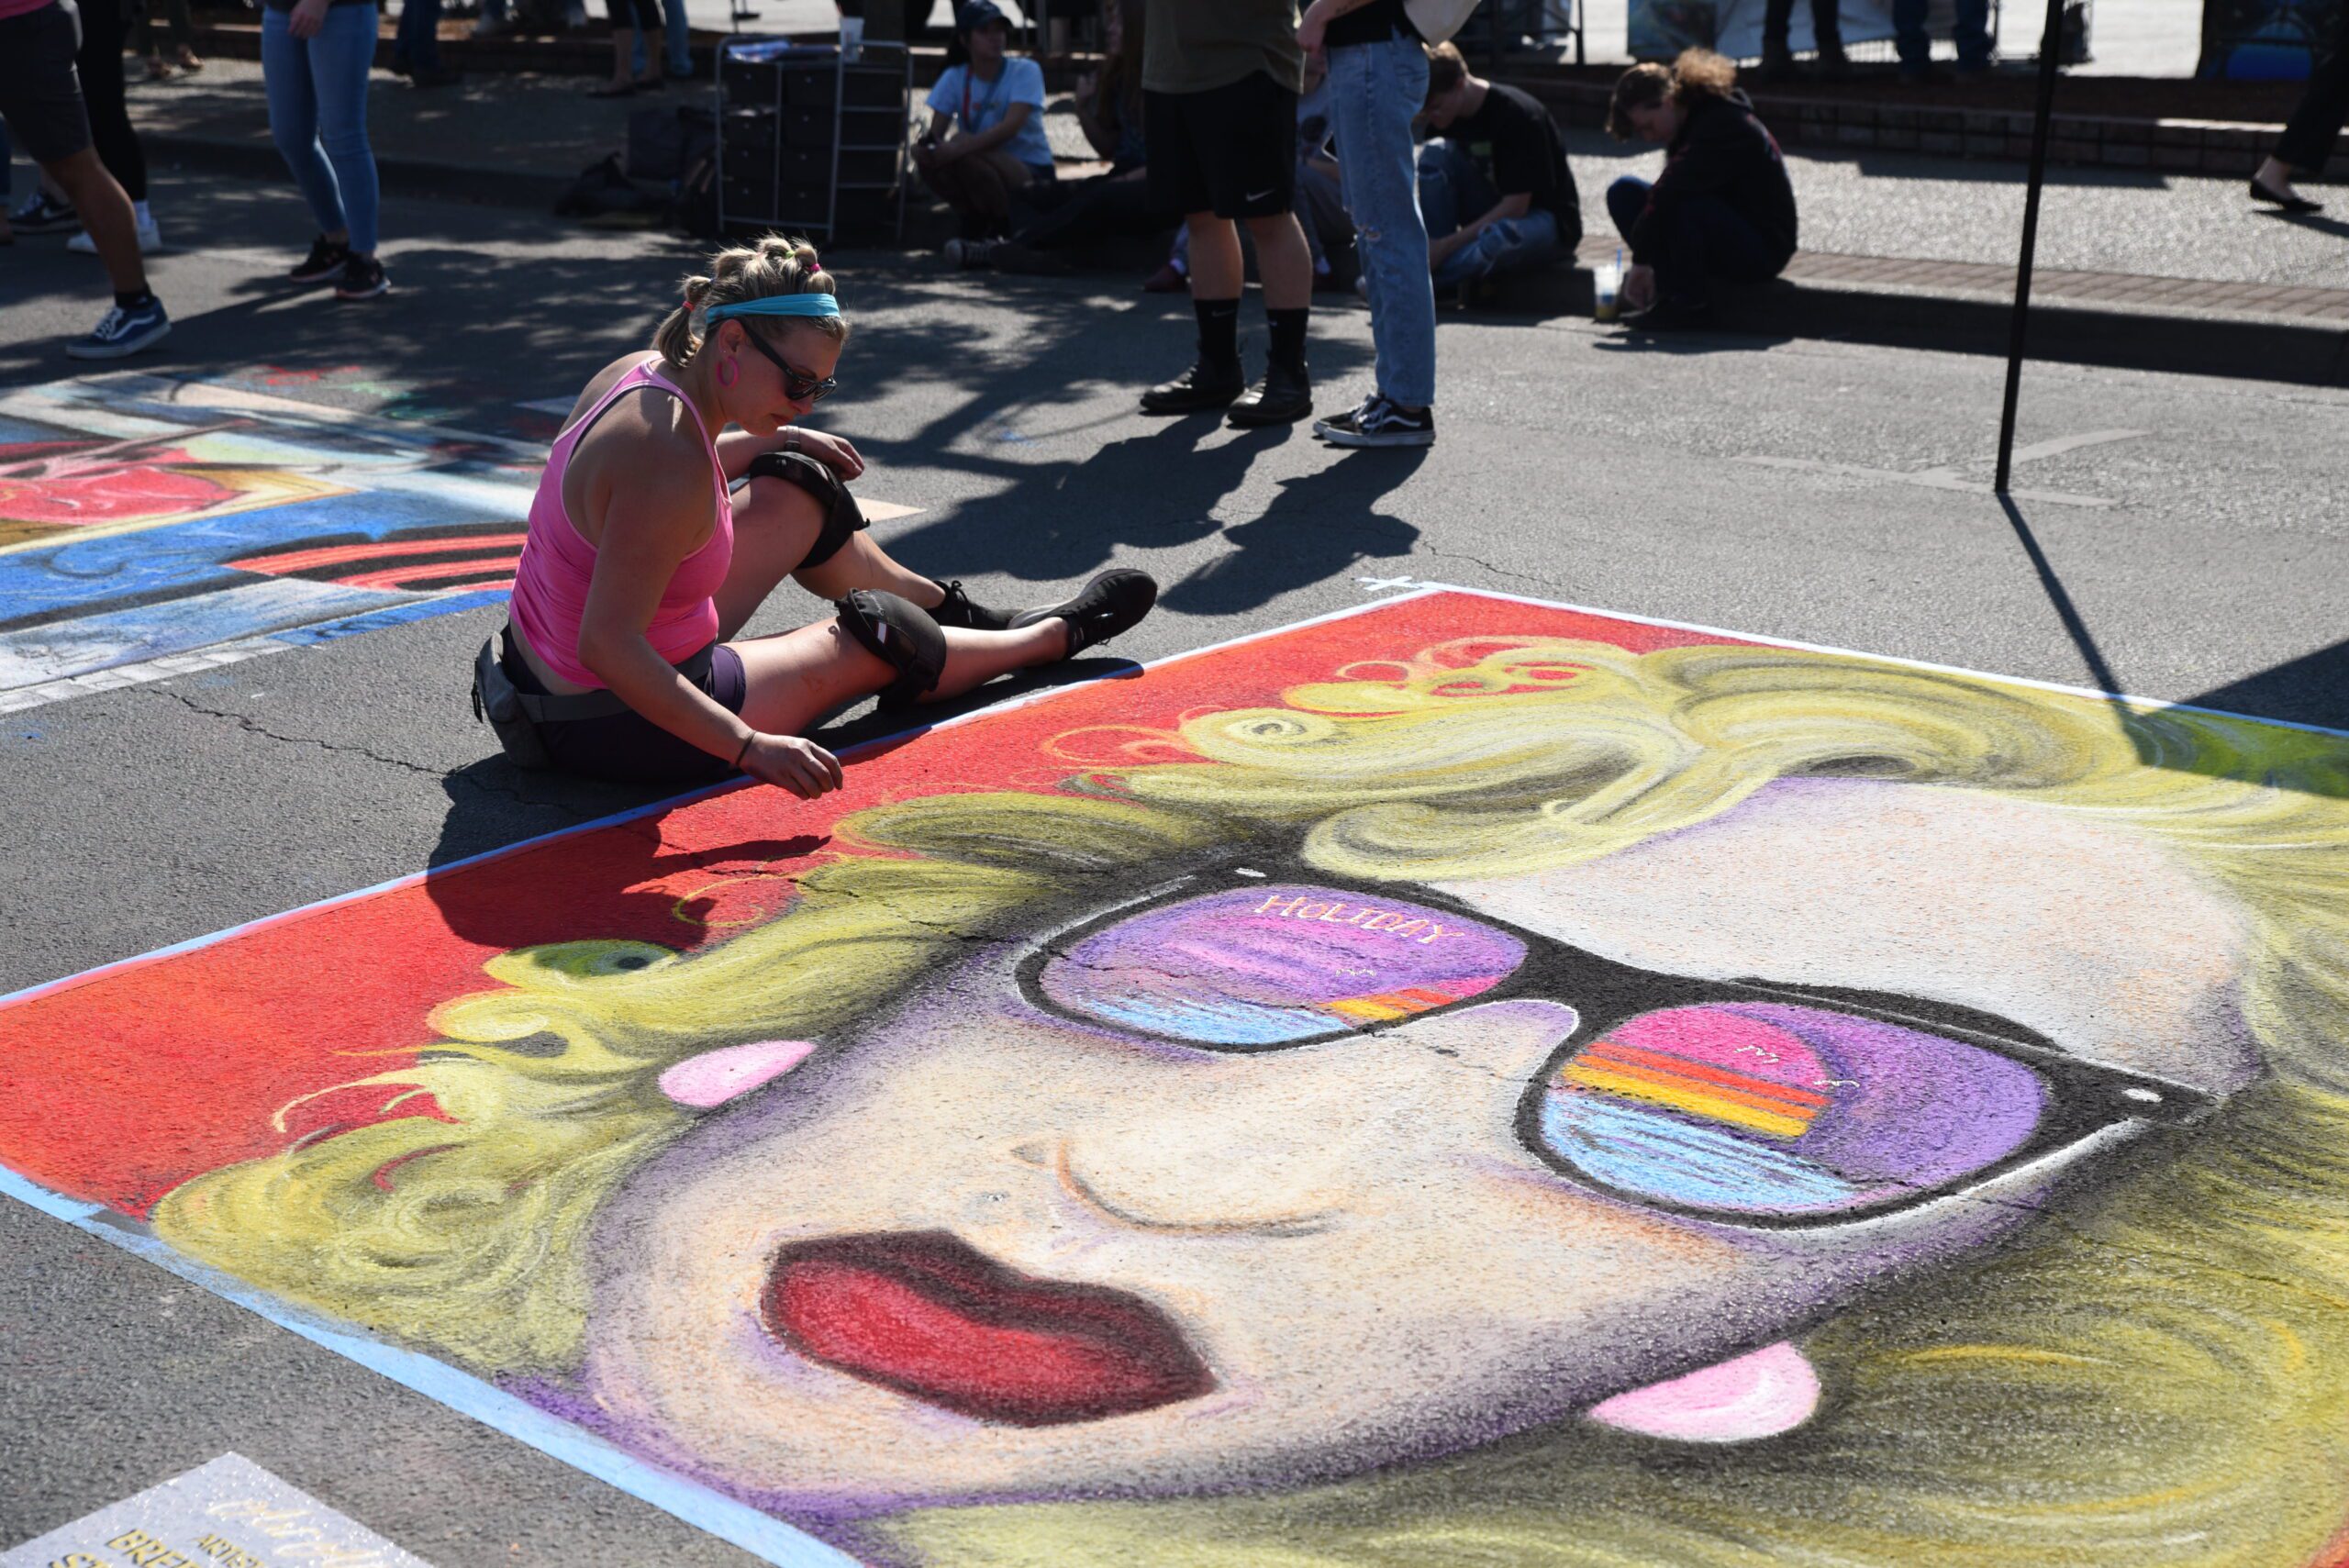 AATR 2022 artist is sitting by a portrait on the street in downtown Grants Pass. The portrait is an old school design of a woman with curly blonde hair, red lipstick, and sunglasses reflecting the setting sun behind the ocean.